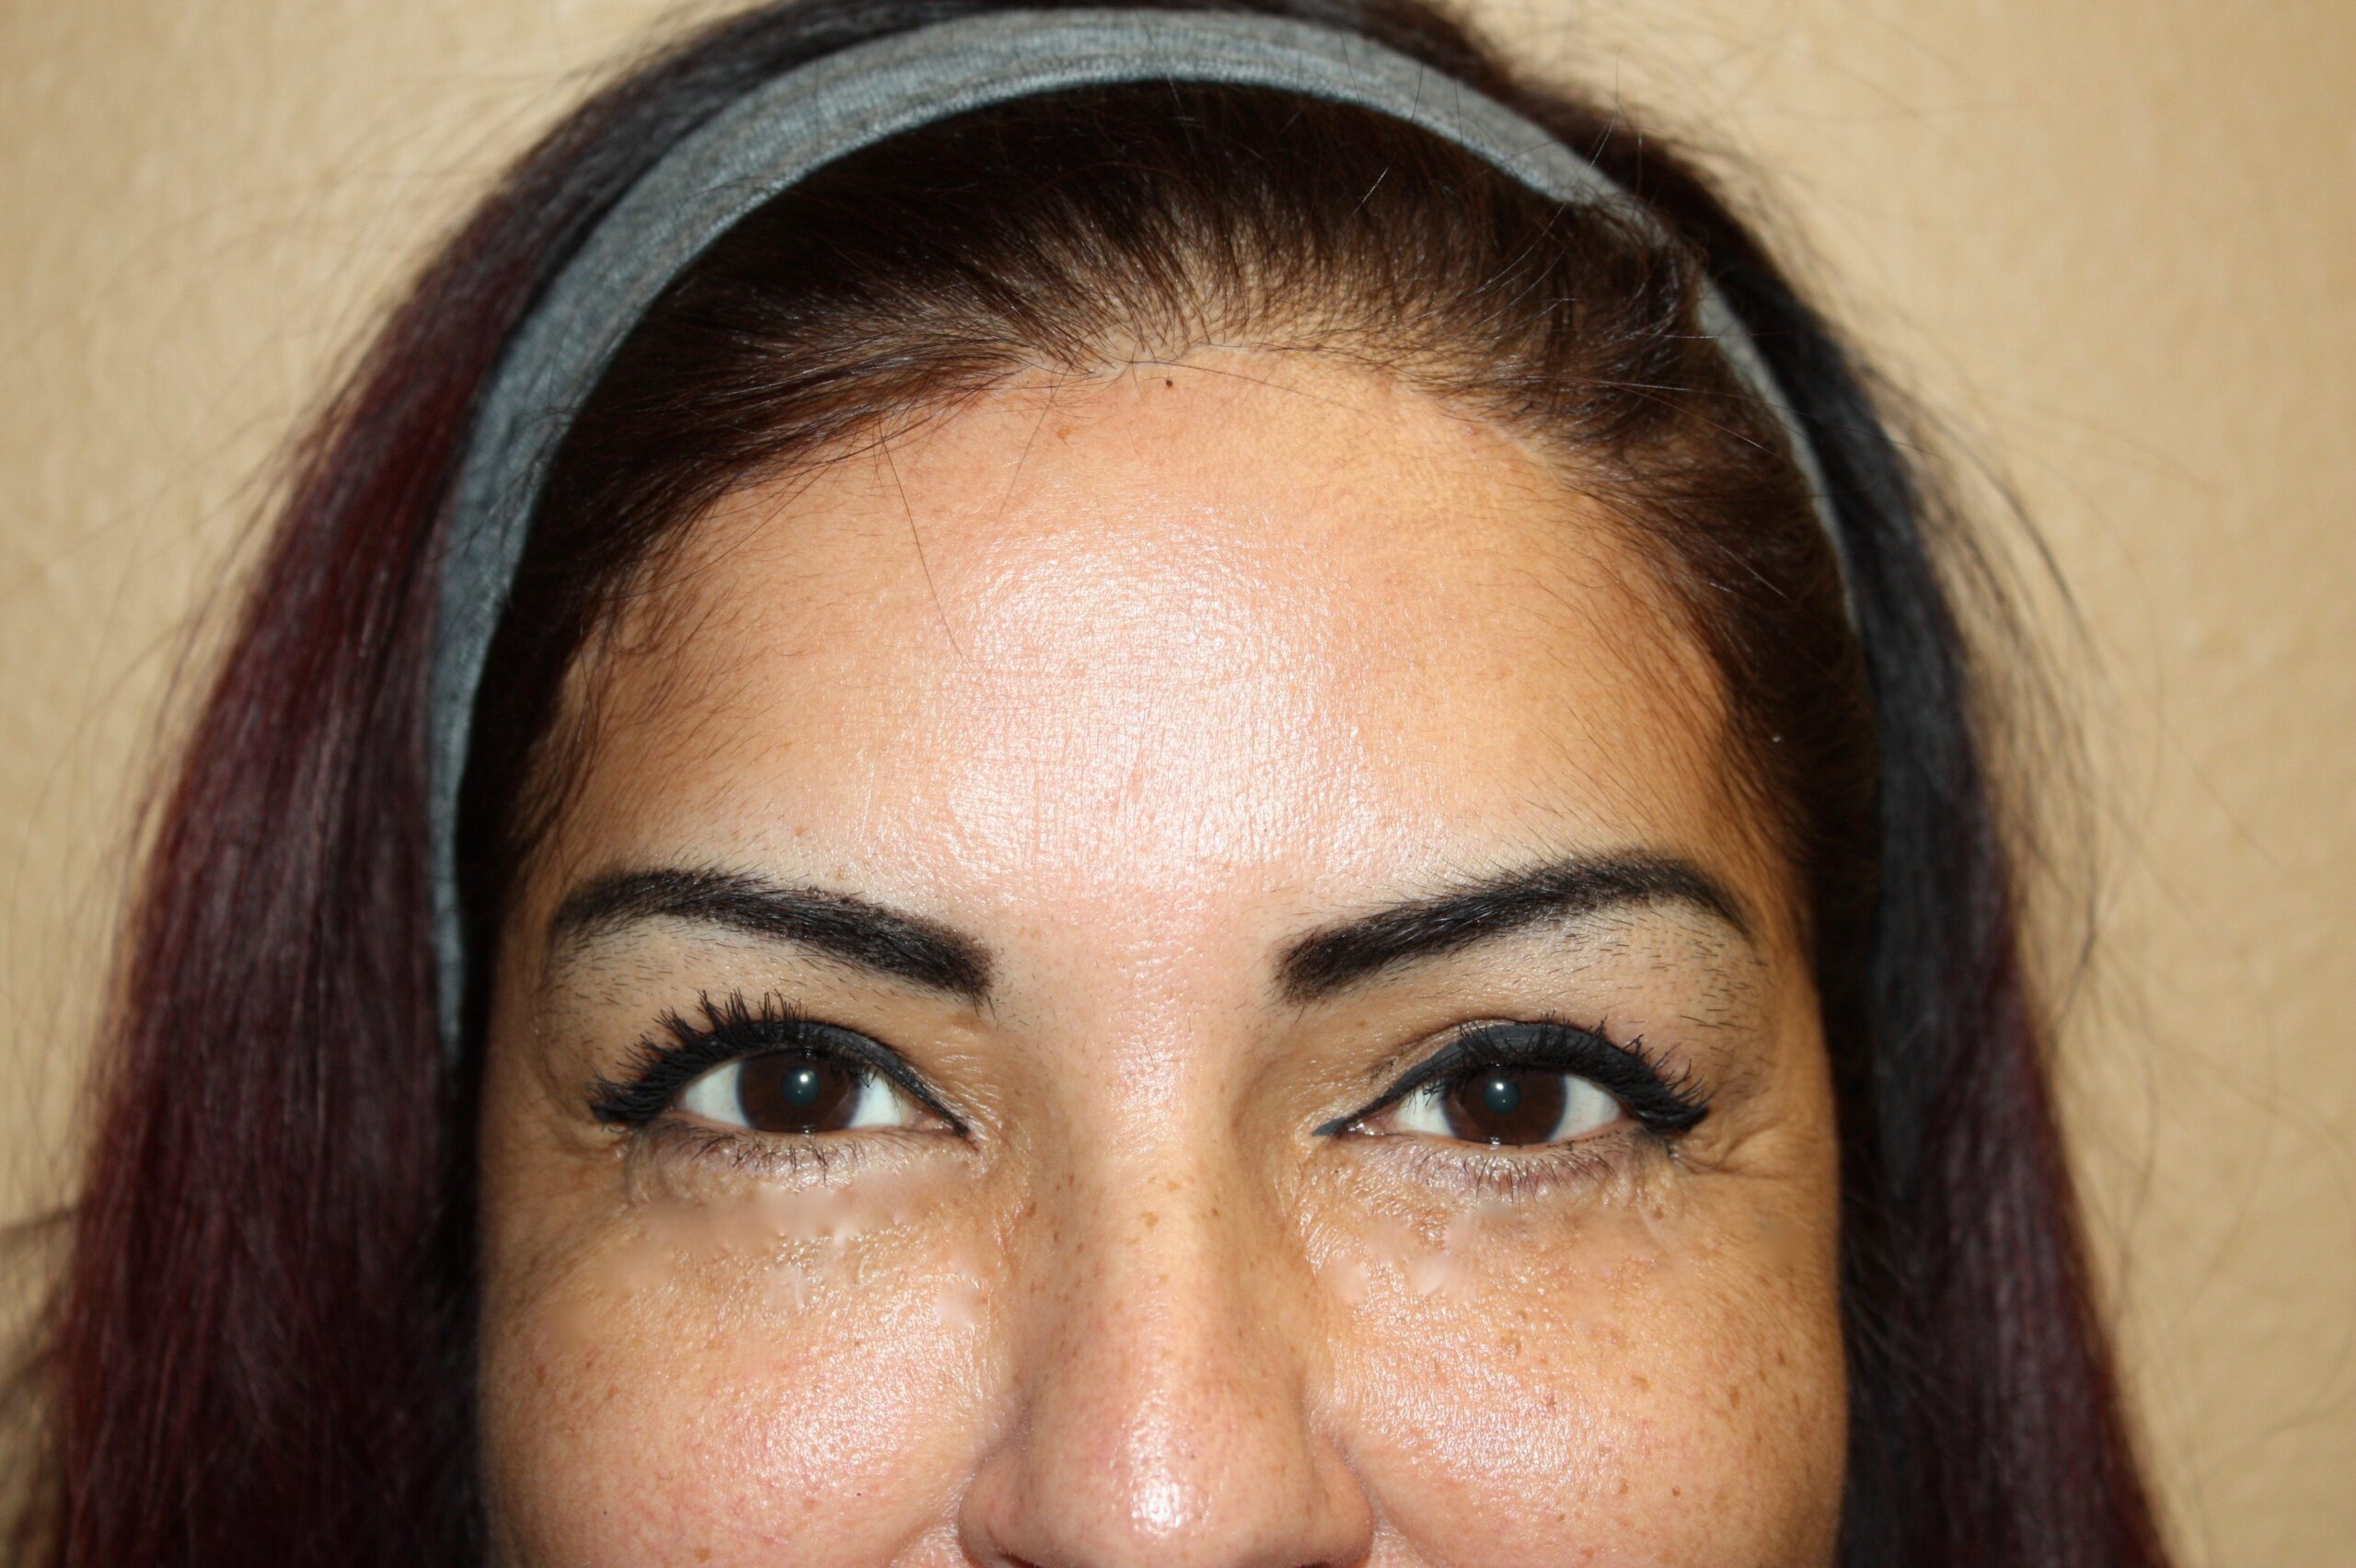 Blepharoplasty | Eyelid Surgery Patient Photo - Case 2348 - after view